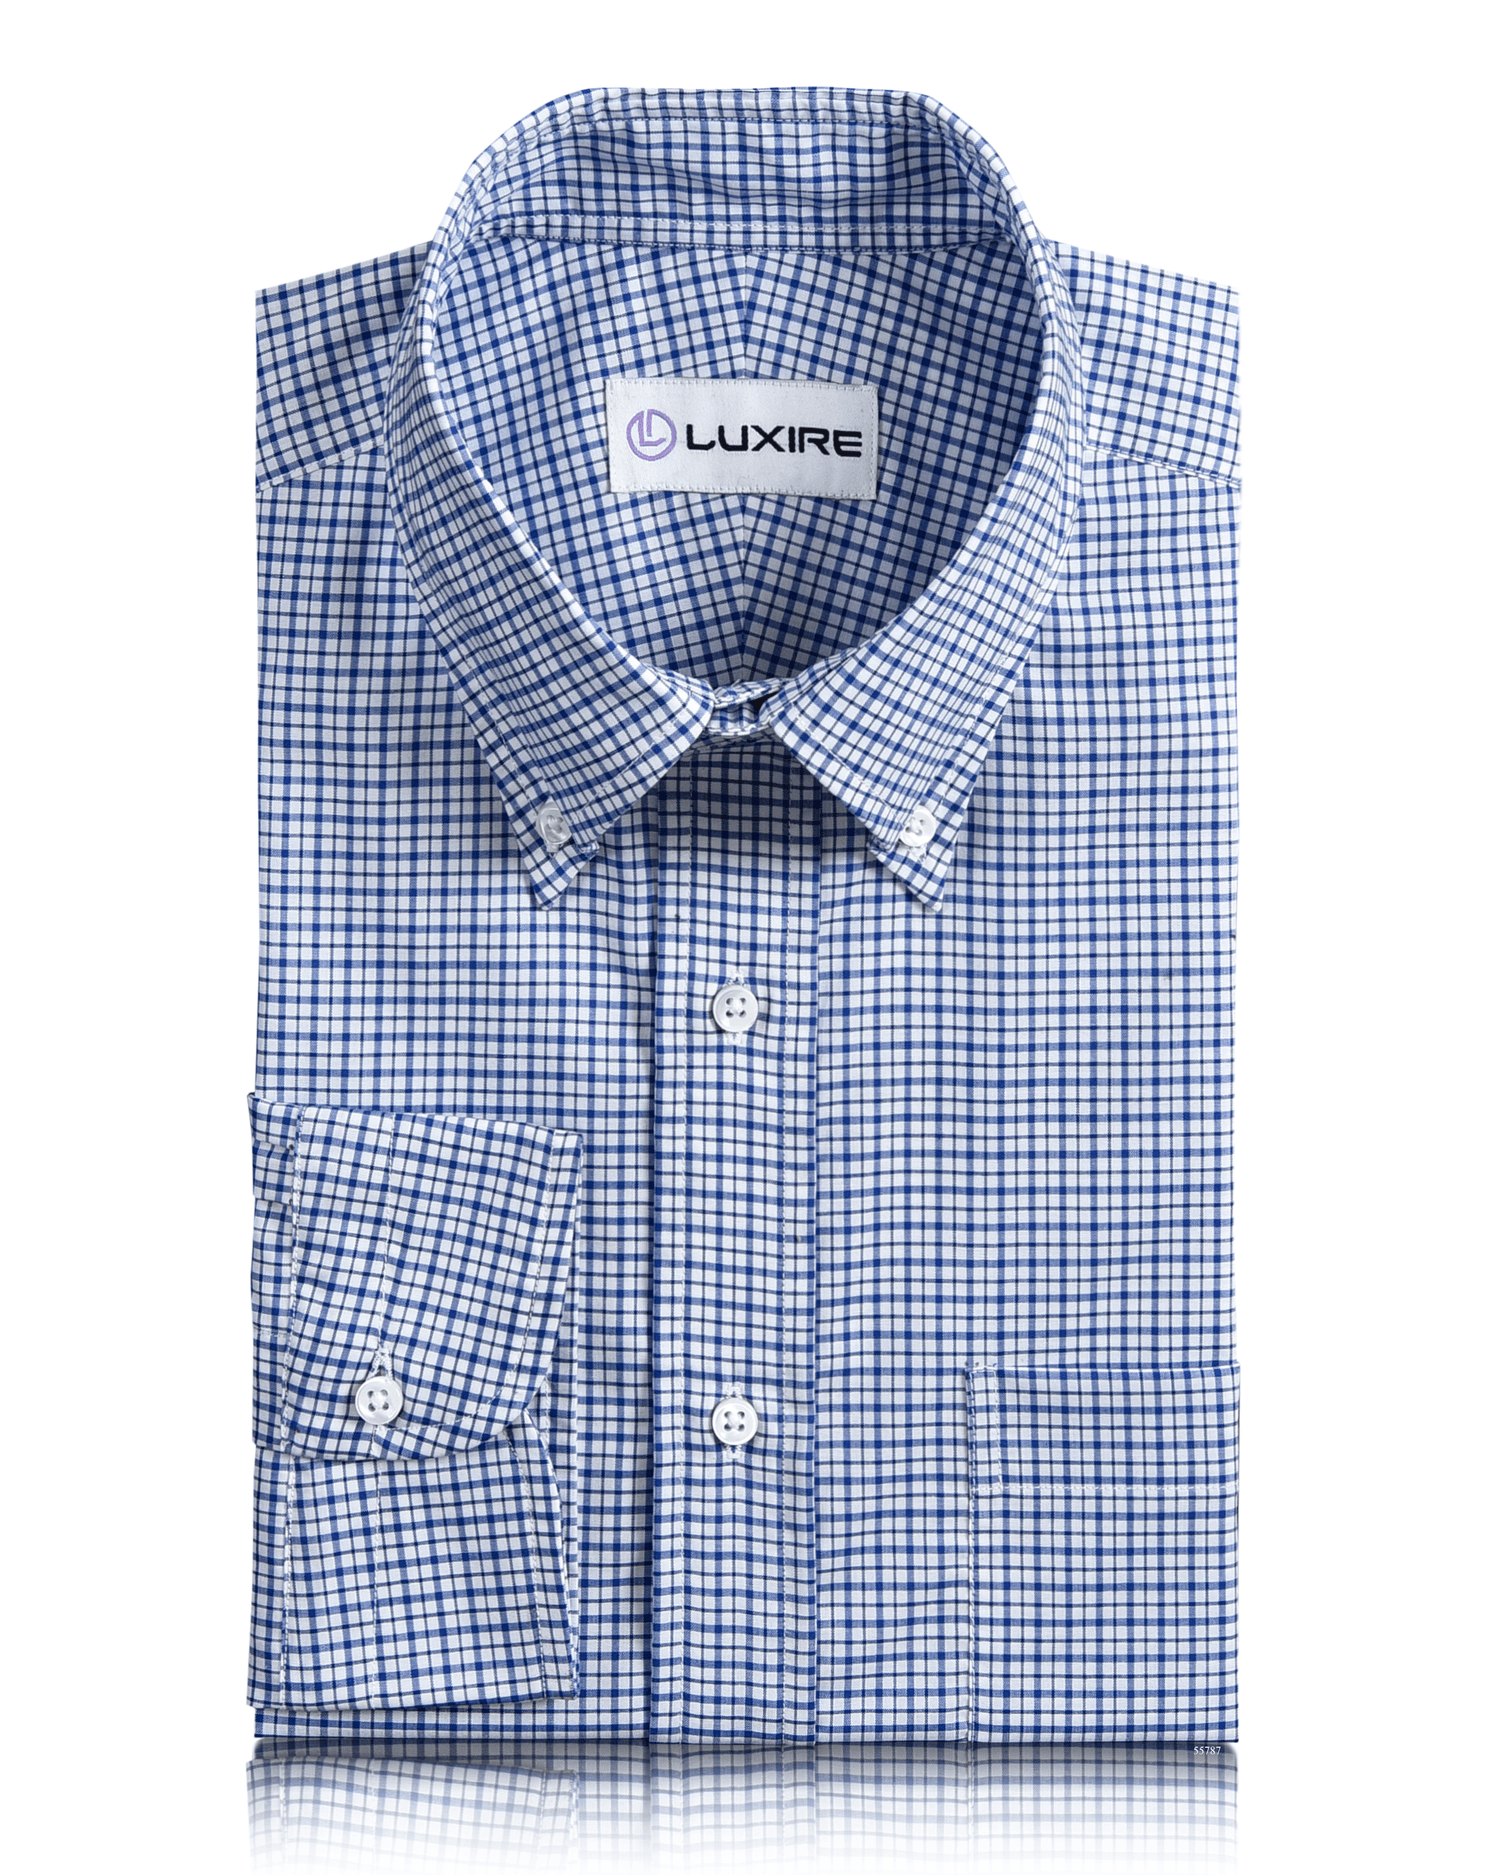 Front view of custom check shirts for men by Luxire navy checks on white